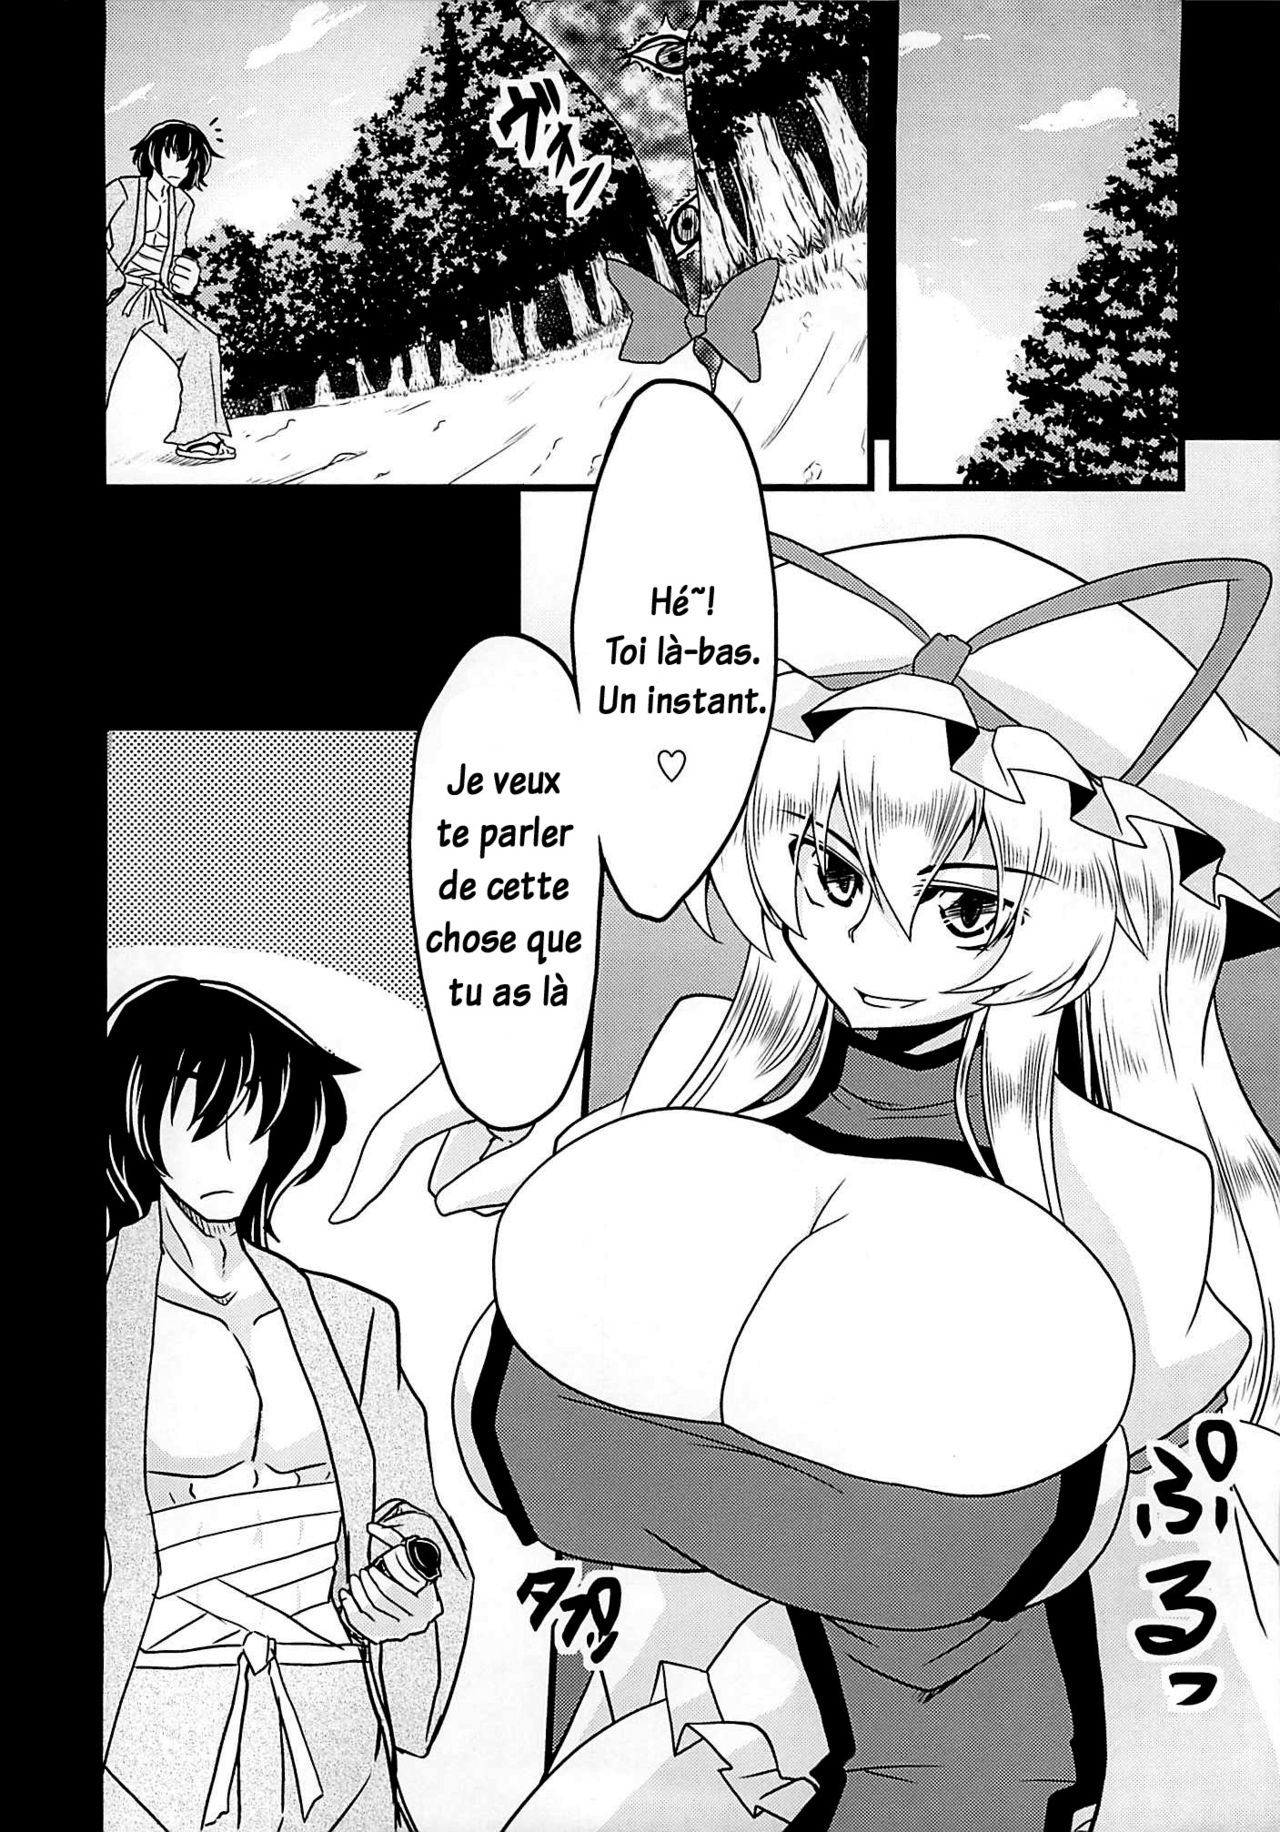 (C81) [Forever and ever... (Eisen)] Gensou Chinchin Monogatari | L'histoire d'une bite imaginé 1 (Touhou Project) [French] [Hentai Graal] (C81) [Forever and ever... (英戦)] 幻想鎮々物語 (東方Project) [フランス翻訳]